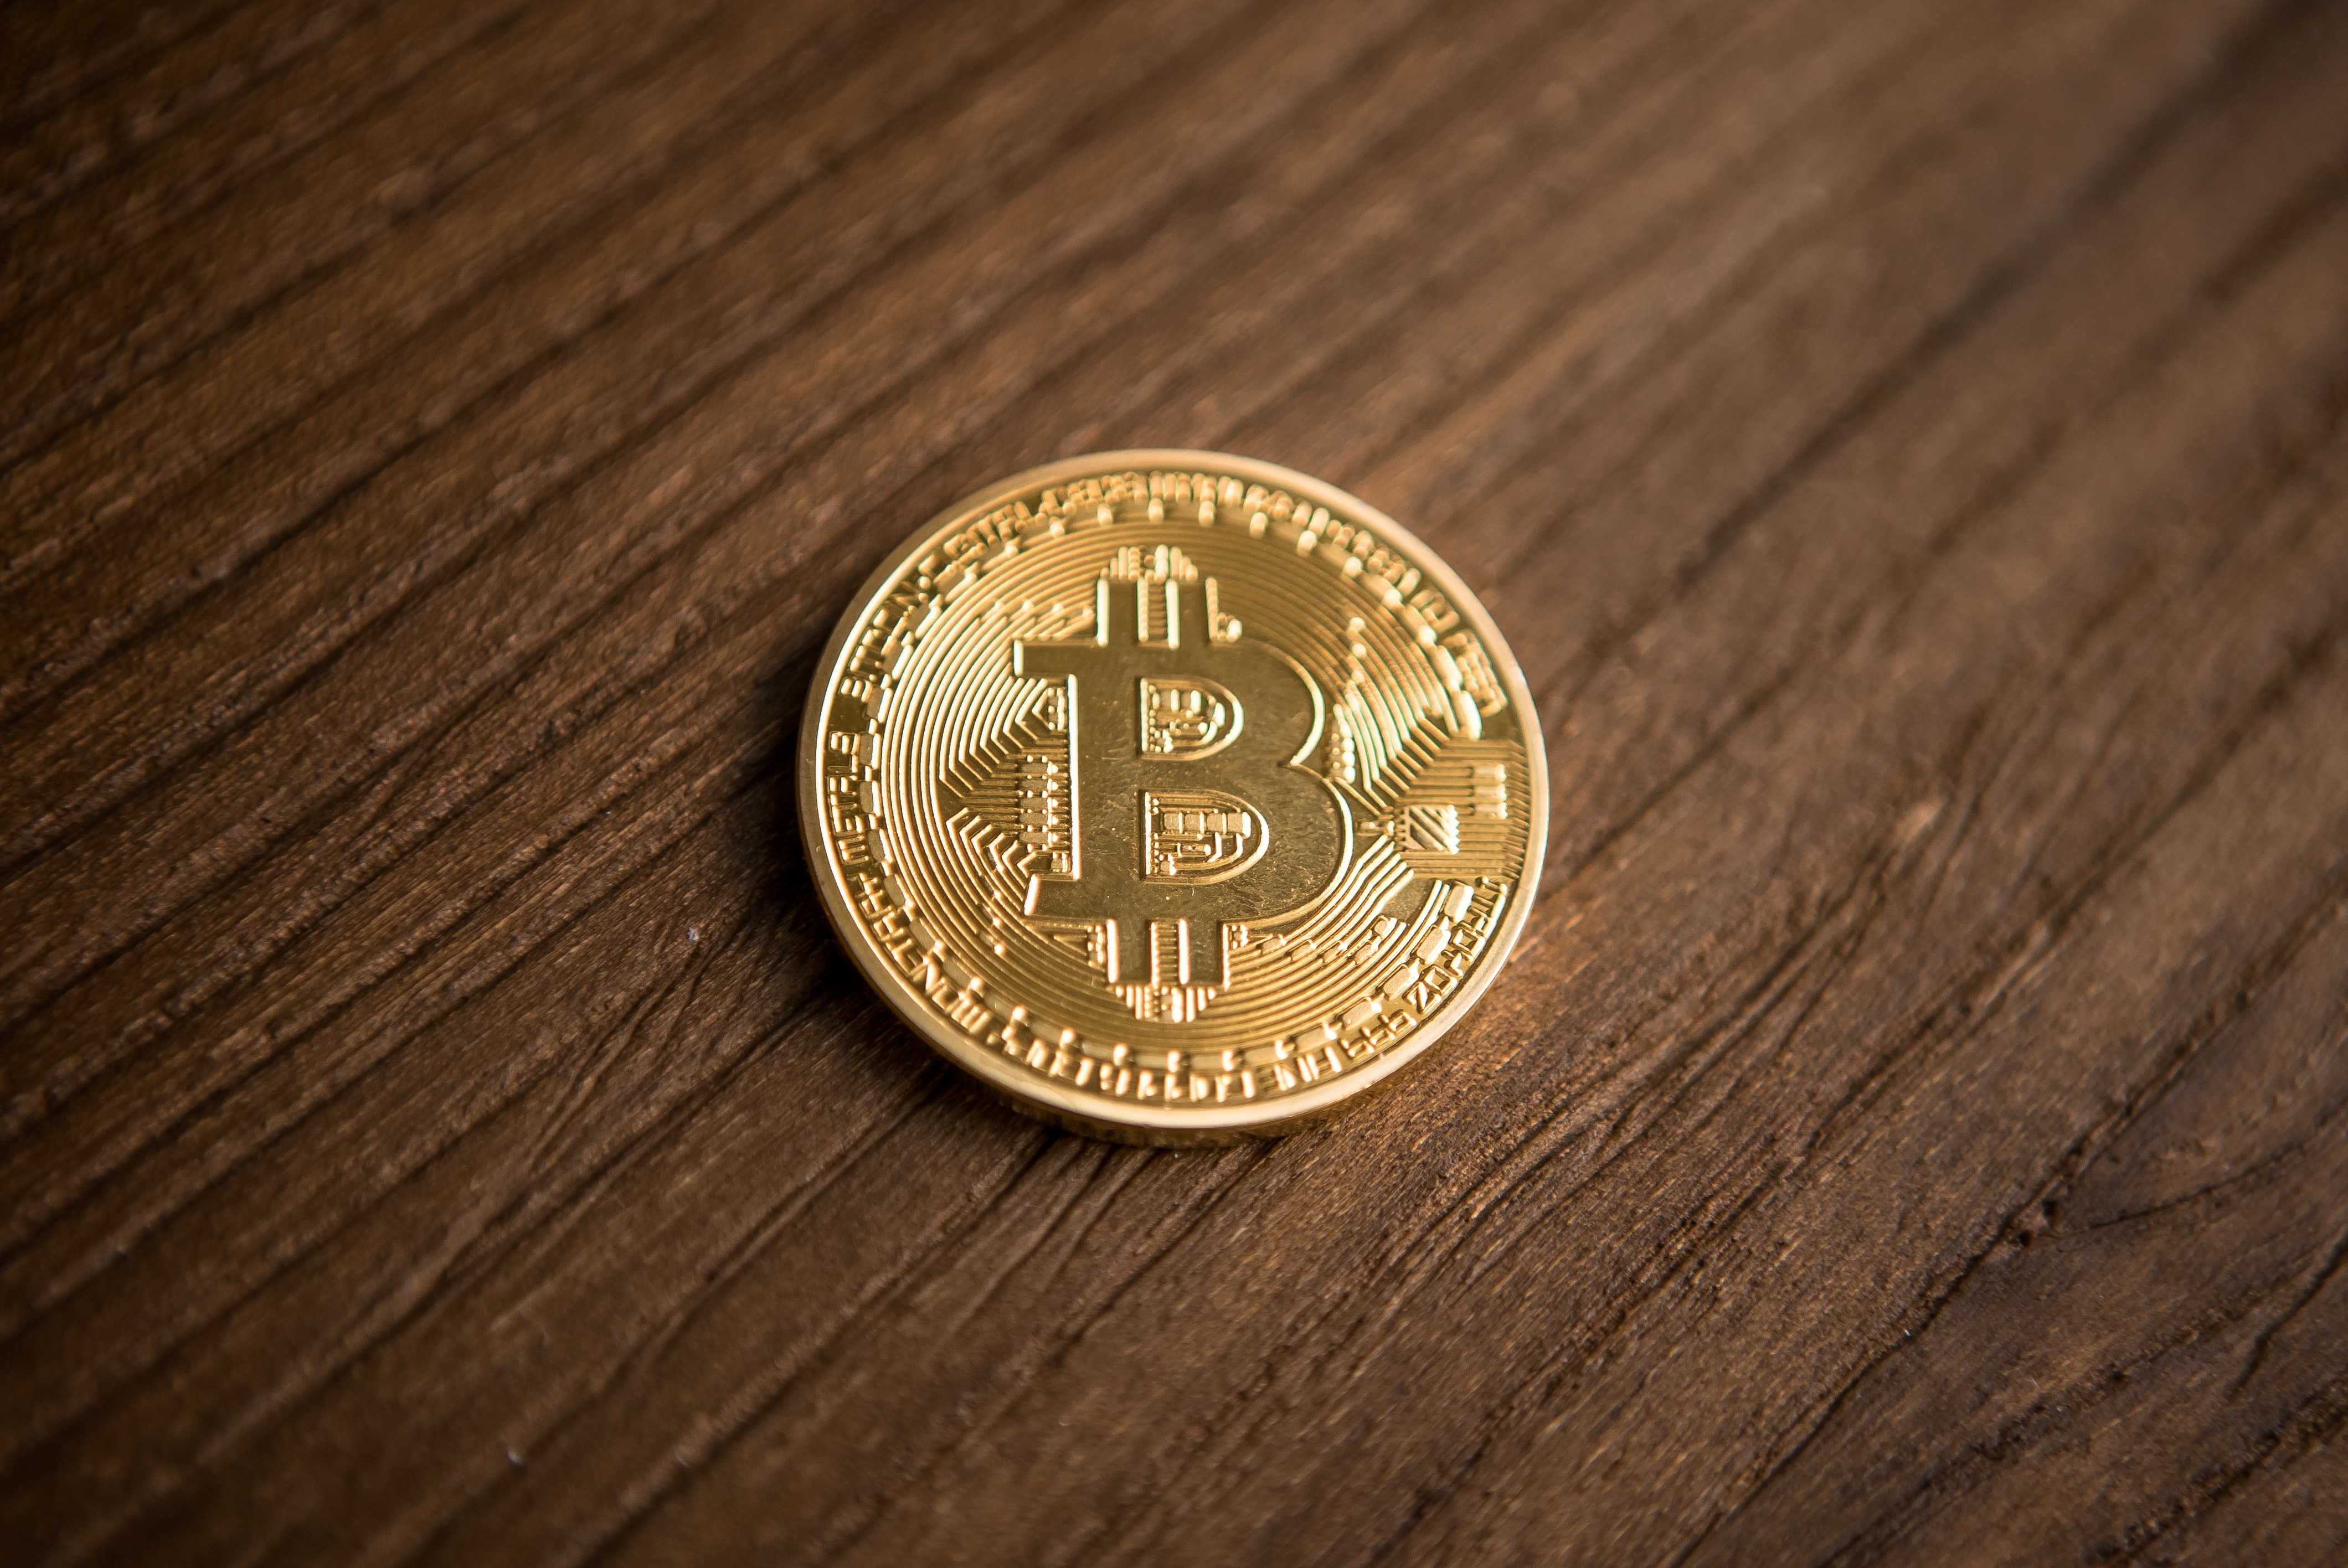 Shakeout Or Top? Here’s What Bitcoin SOPR Says About It